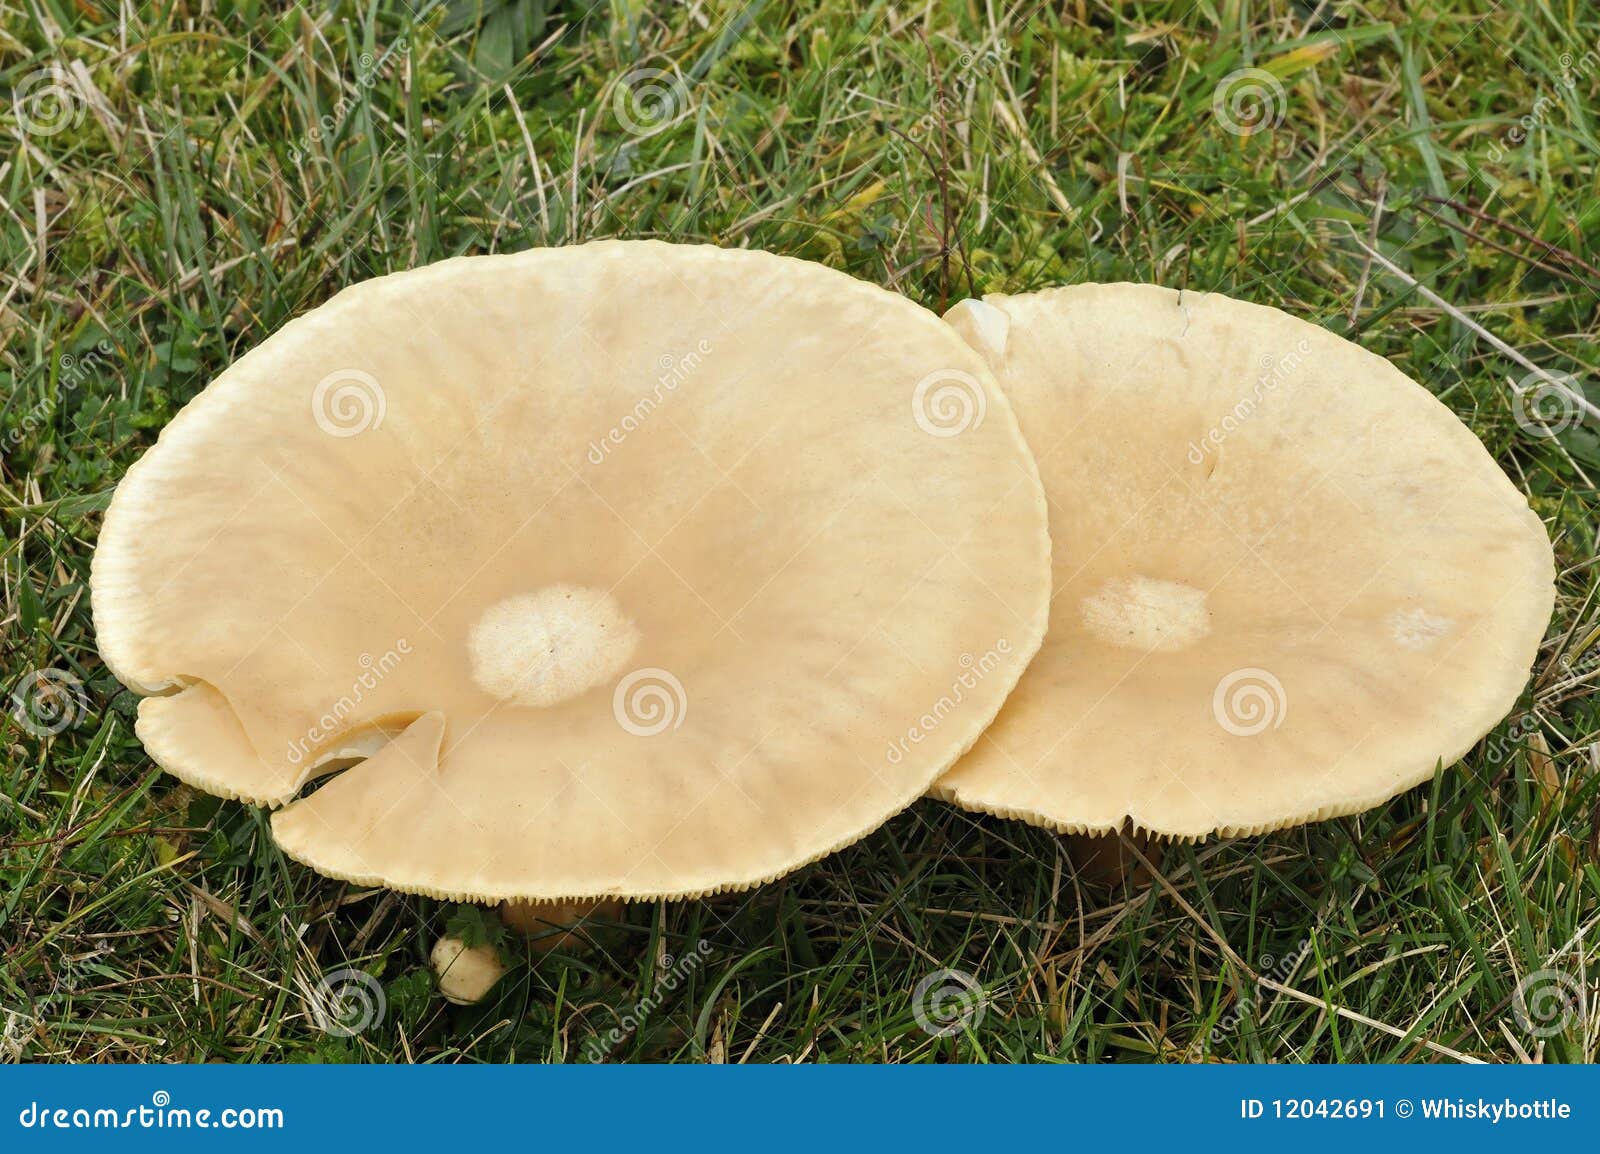 trooping funnel - clitocybe geotropa